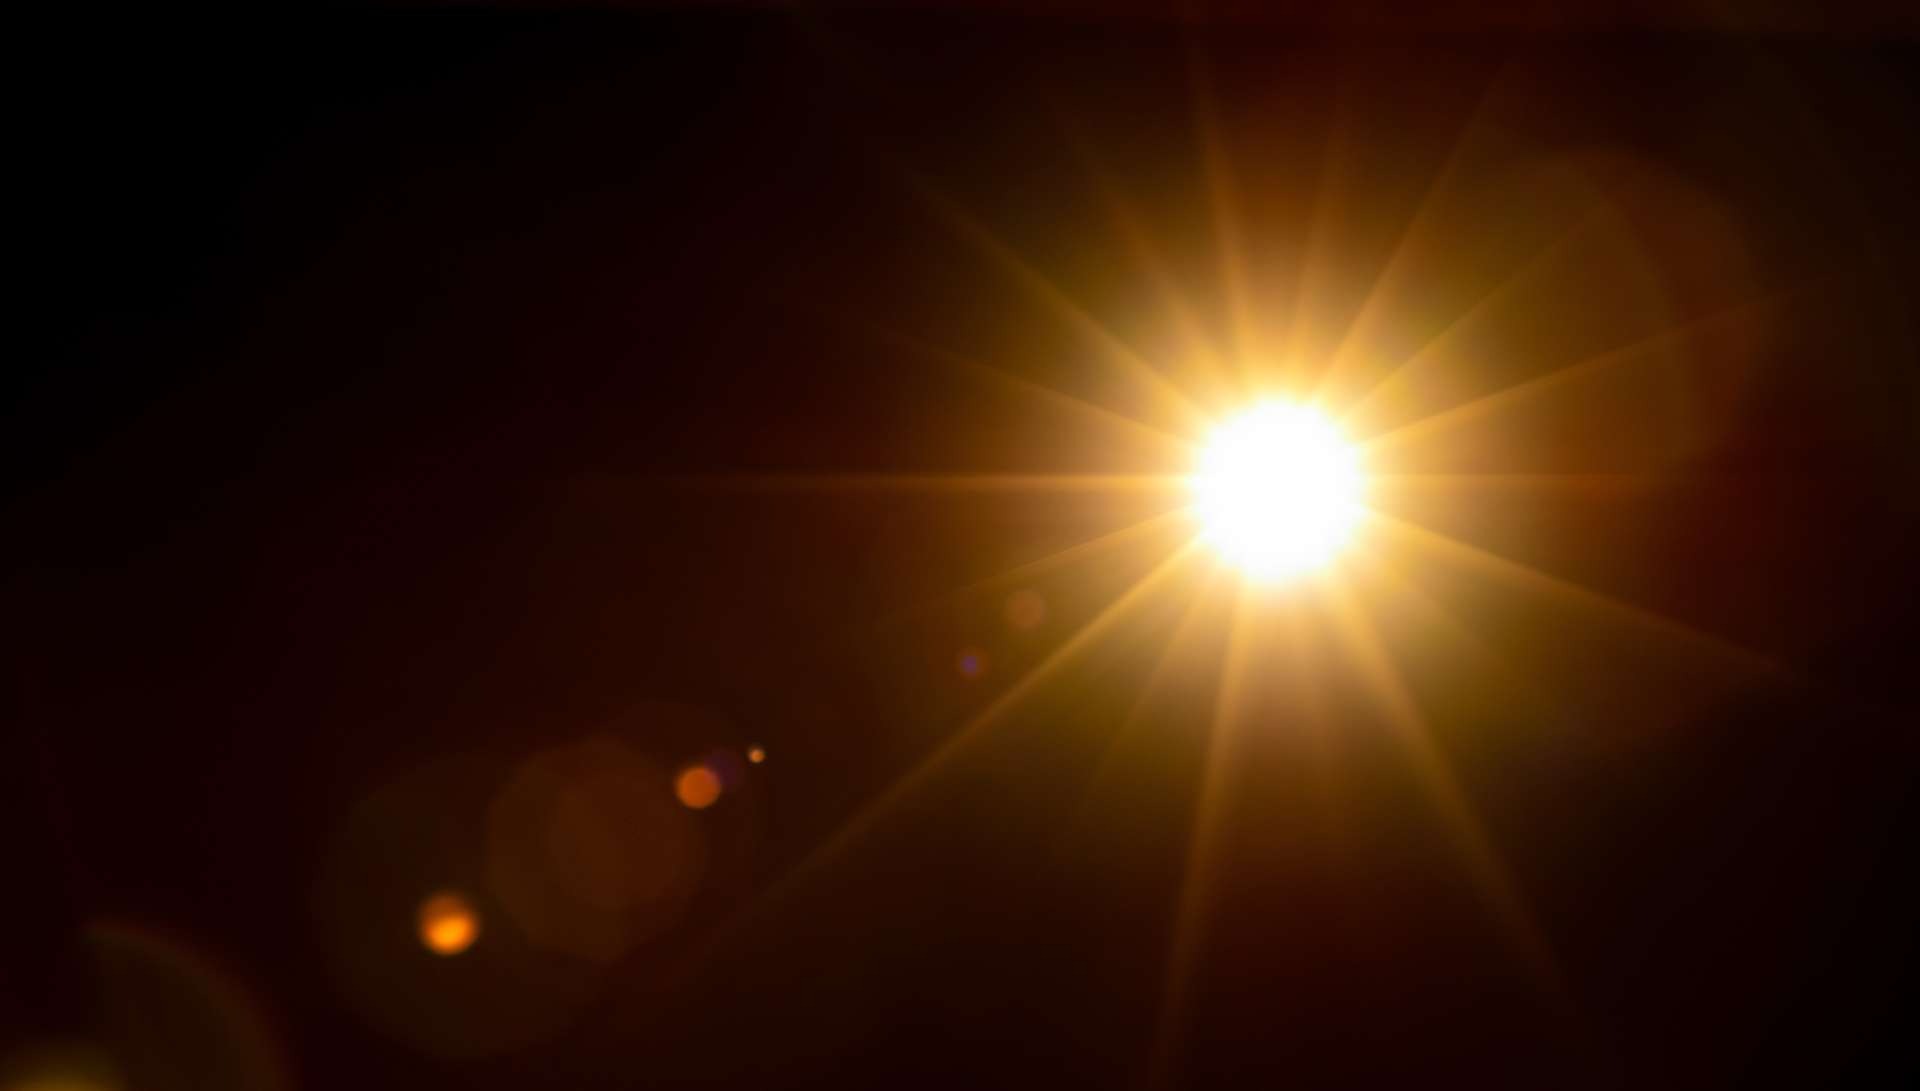 The sun emits high-energy light from an unknown source.